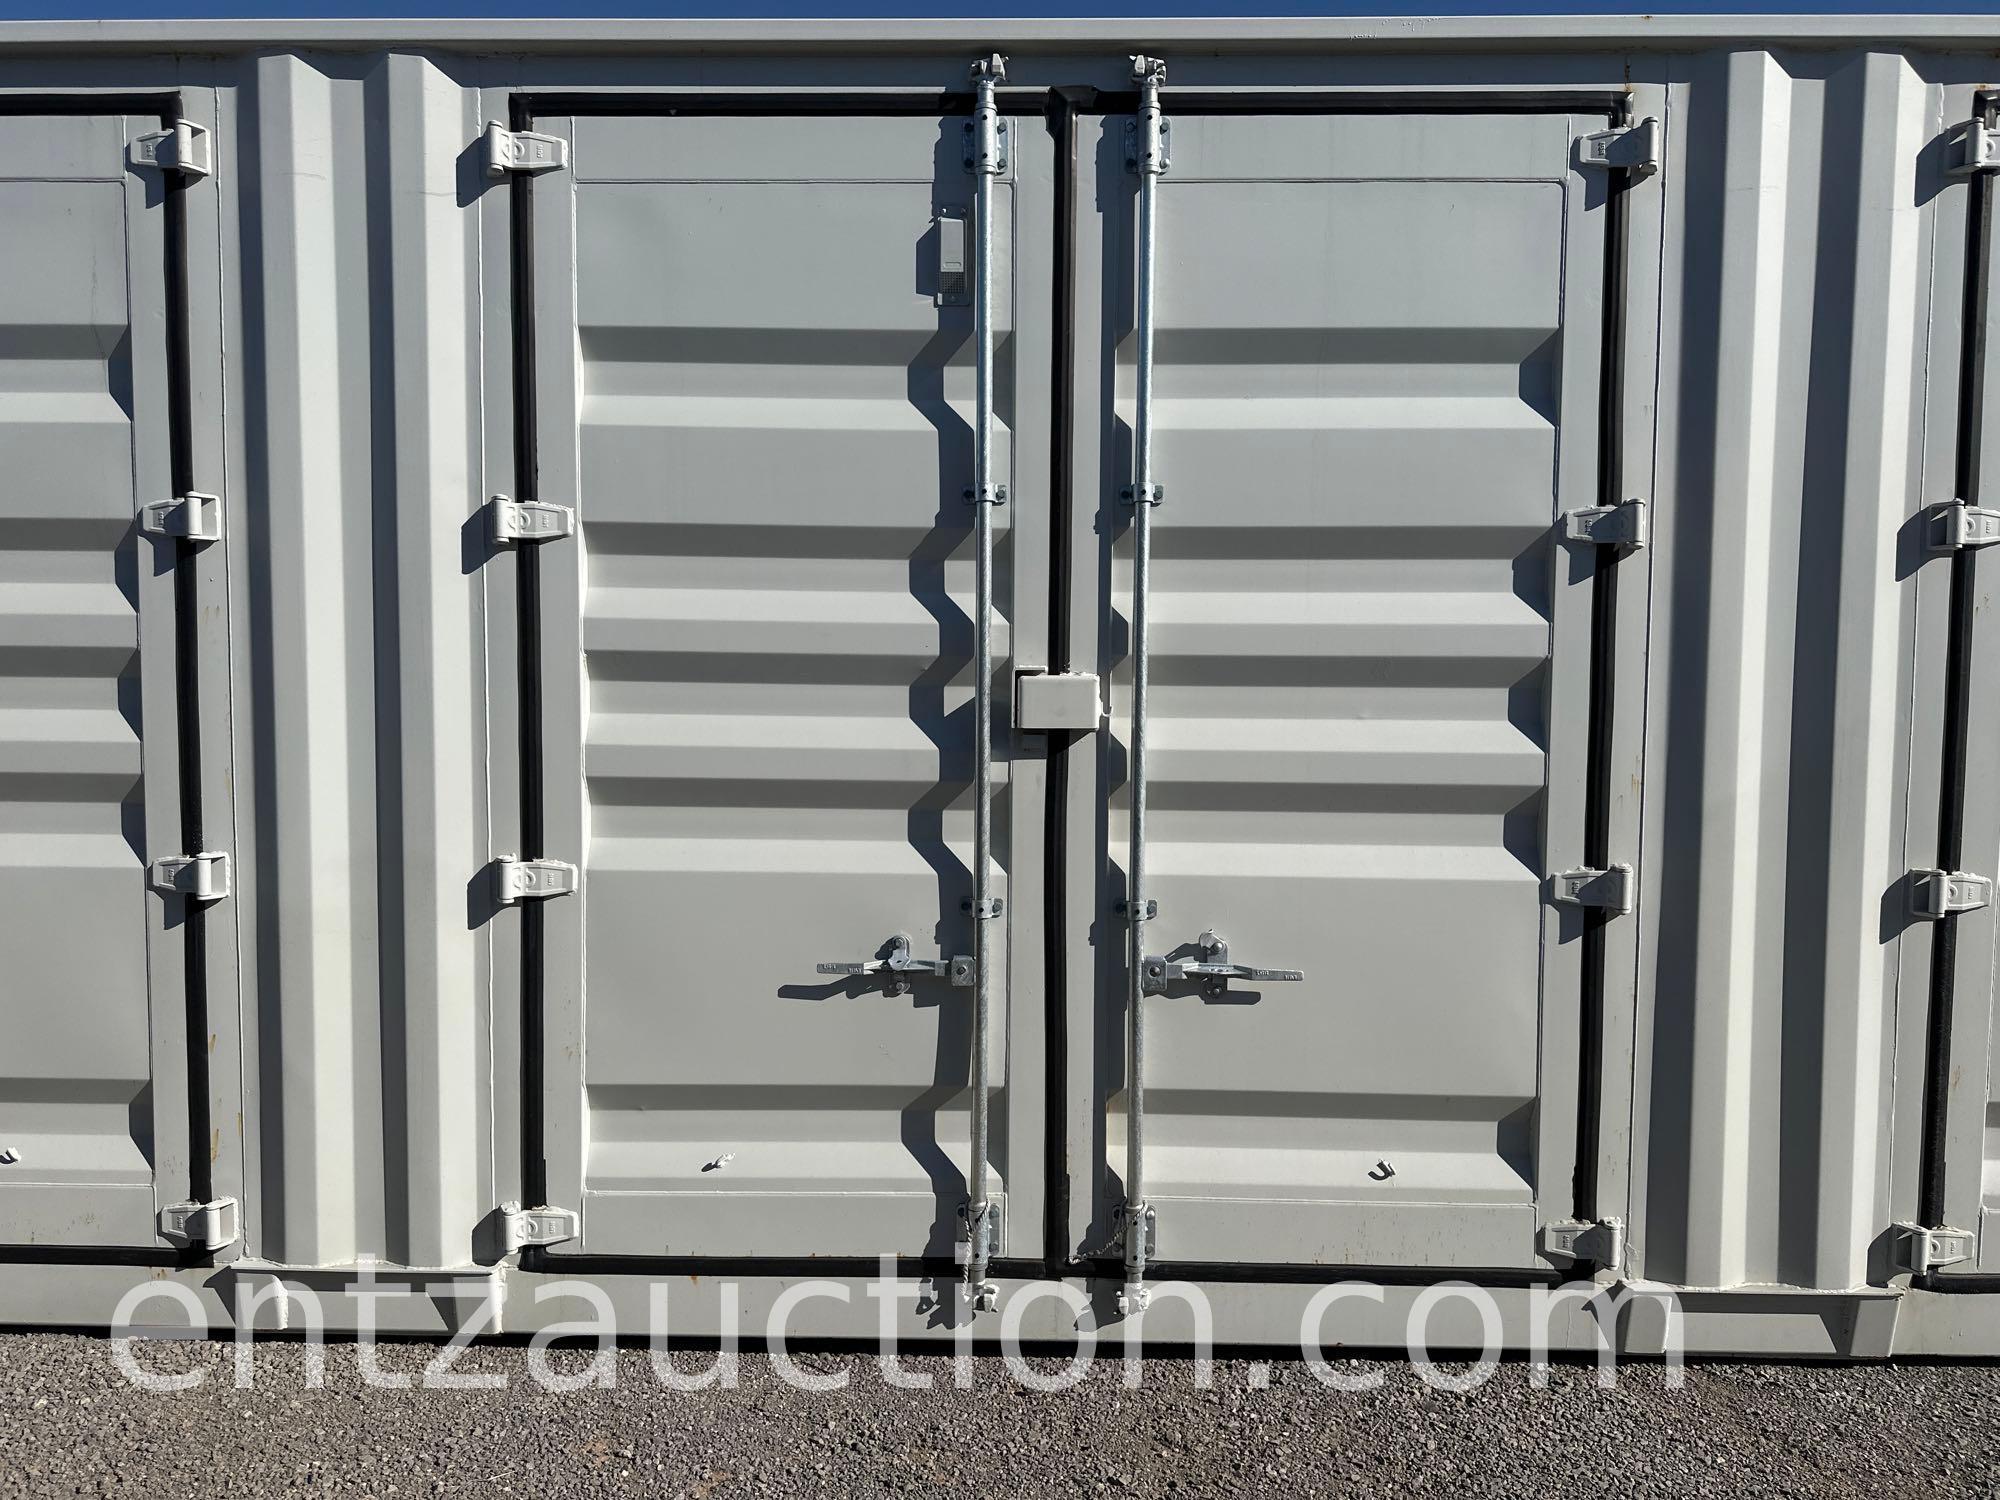 40' X 8' X 9 1/2' SHIPPING CONTAINER,